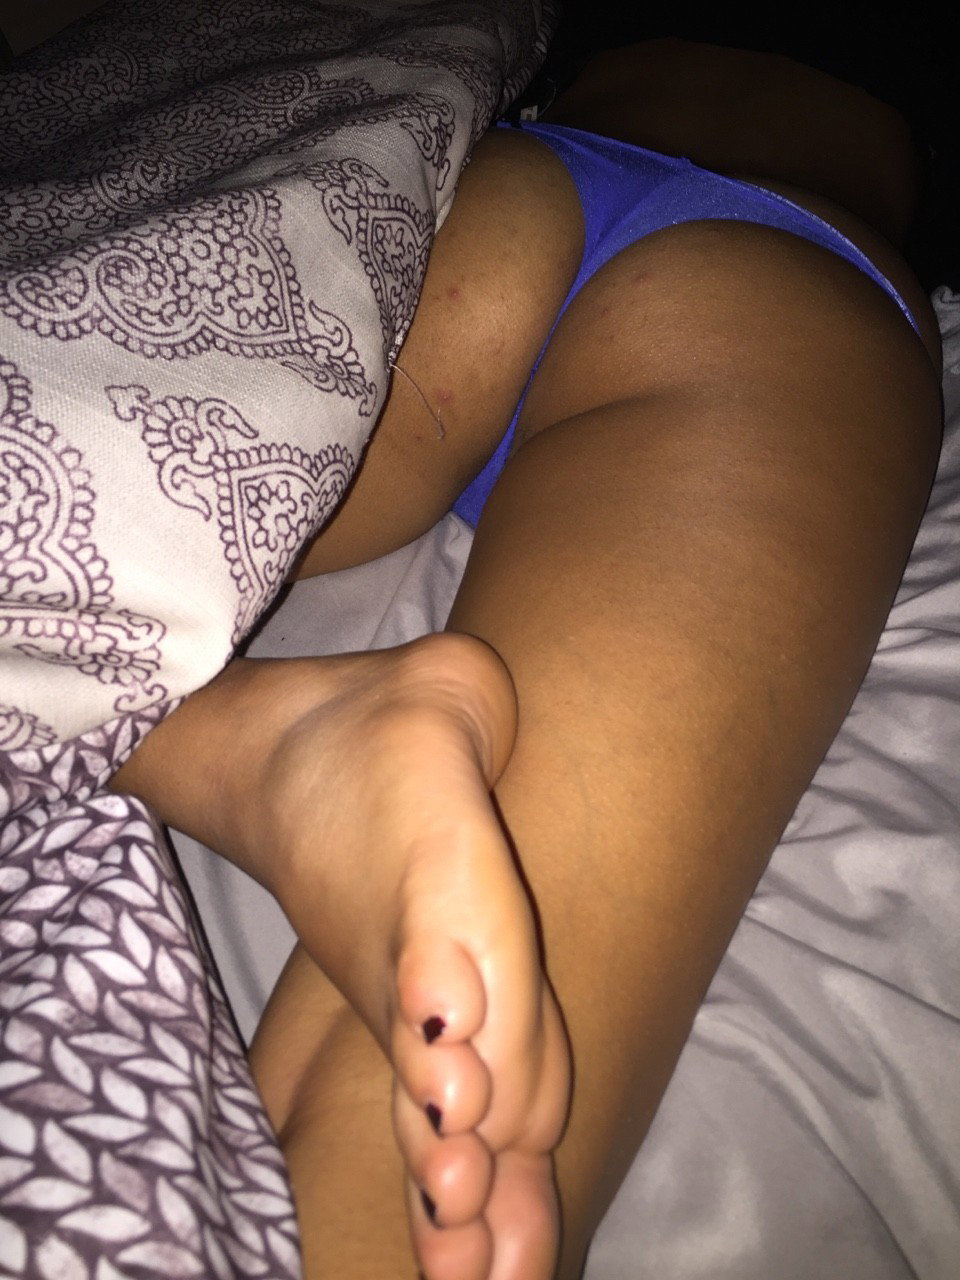 Photo by Nilegoddess with the username @Nilegoddess, who is a star user,  November 6, 2018 at 9:02 AM and the text says 'Goodnight babes  #sexy  #teen  #foot  #feet  #slut  #legs  #ass  #butt  #panty  #panties  #soles  #toes  #foot  #wrinkles  #young  #lower  #back  #calves  #thighs  #mound  #fetish'